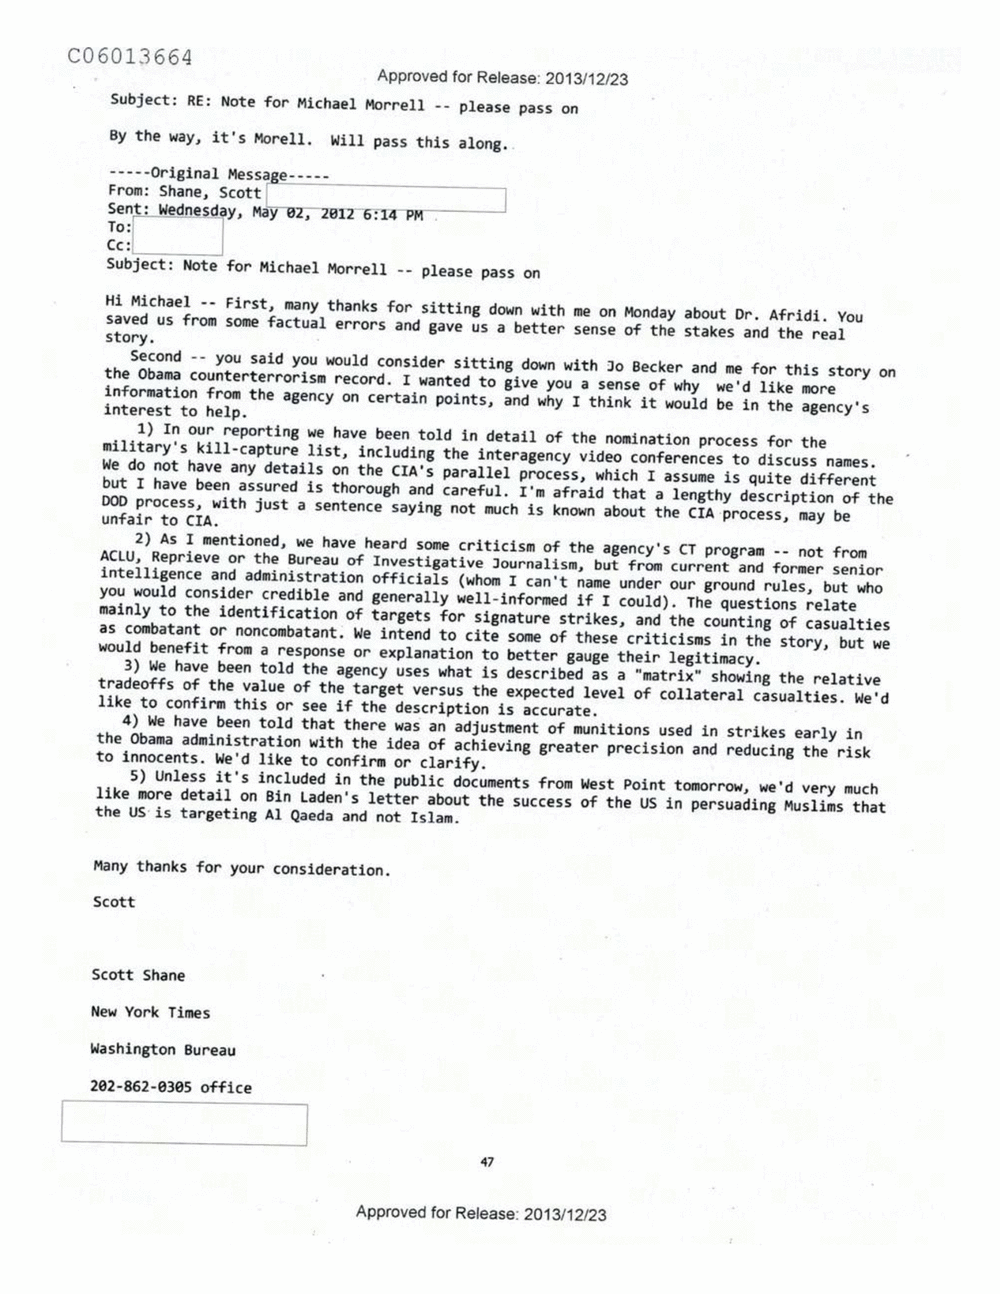 Page 511 from Email Correspondence Between Reporters and CIA Flacks